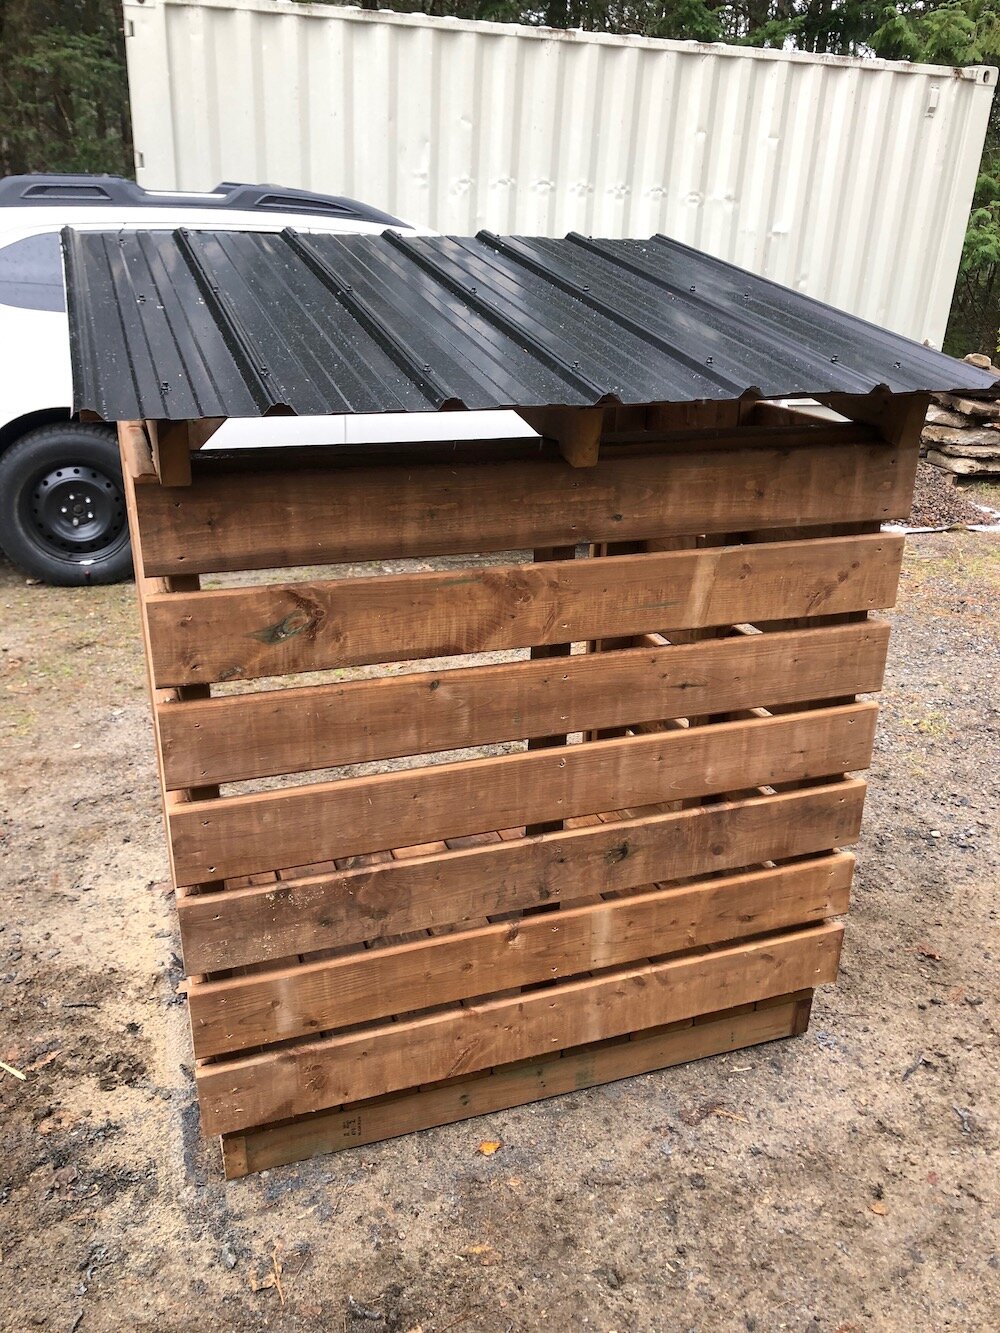 Small Fire Wood Roofed Shelters - Storage Rack Solutions